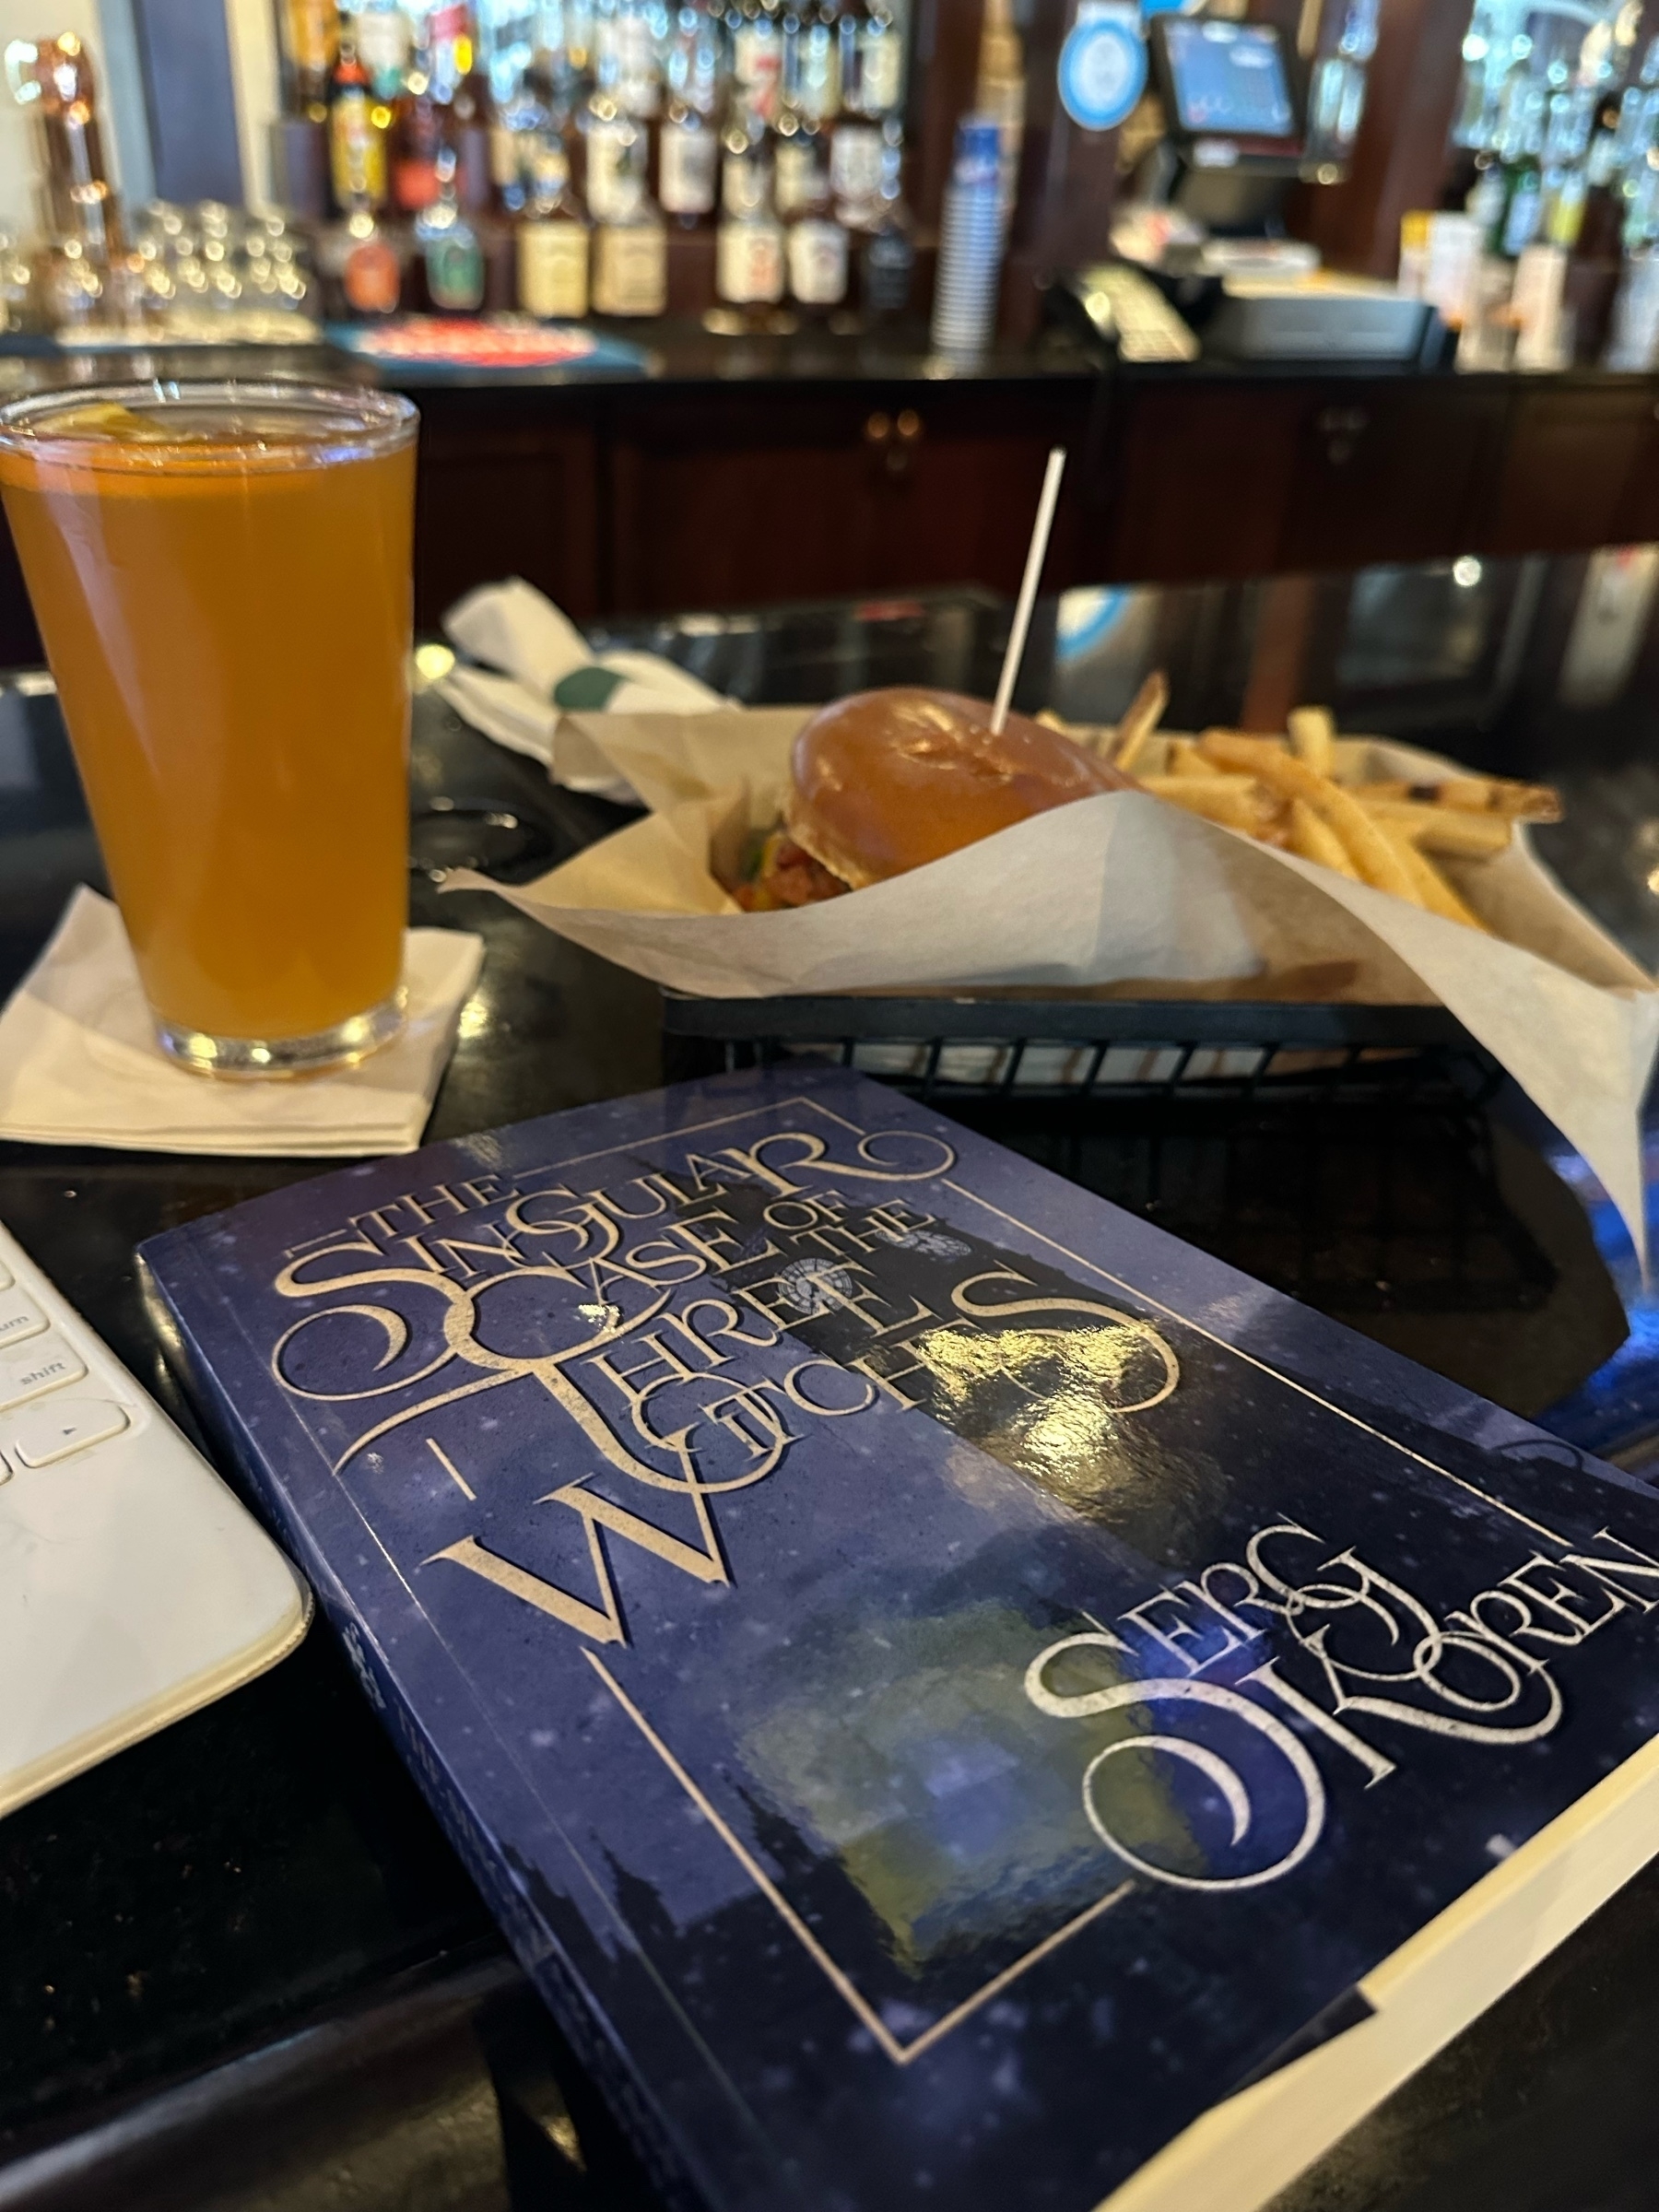 burger and "Tge Singular Case of the Three Witches"